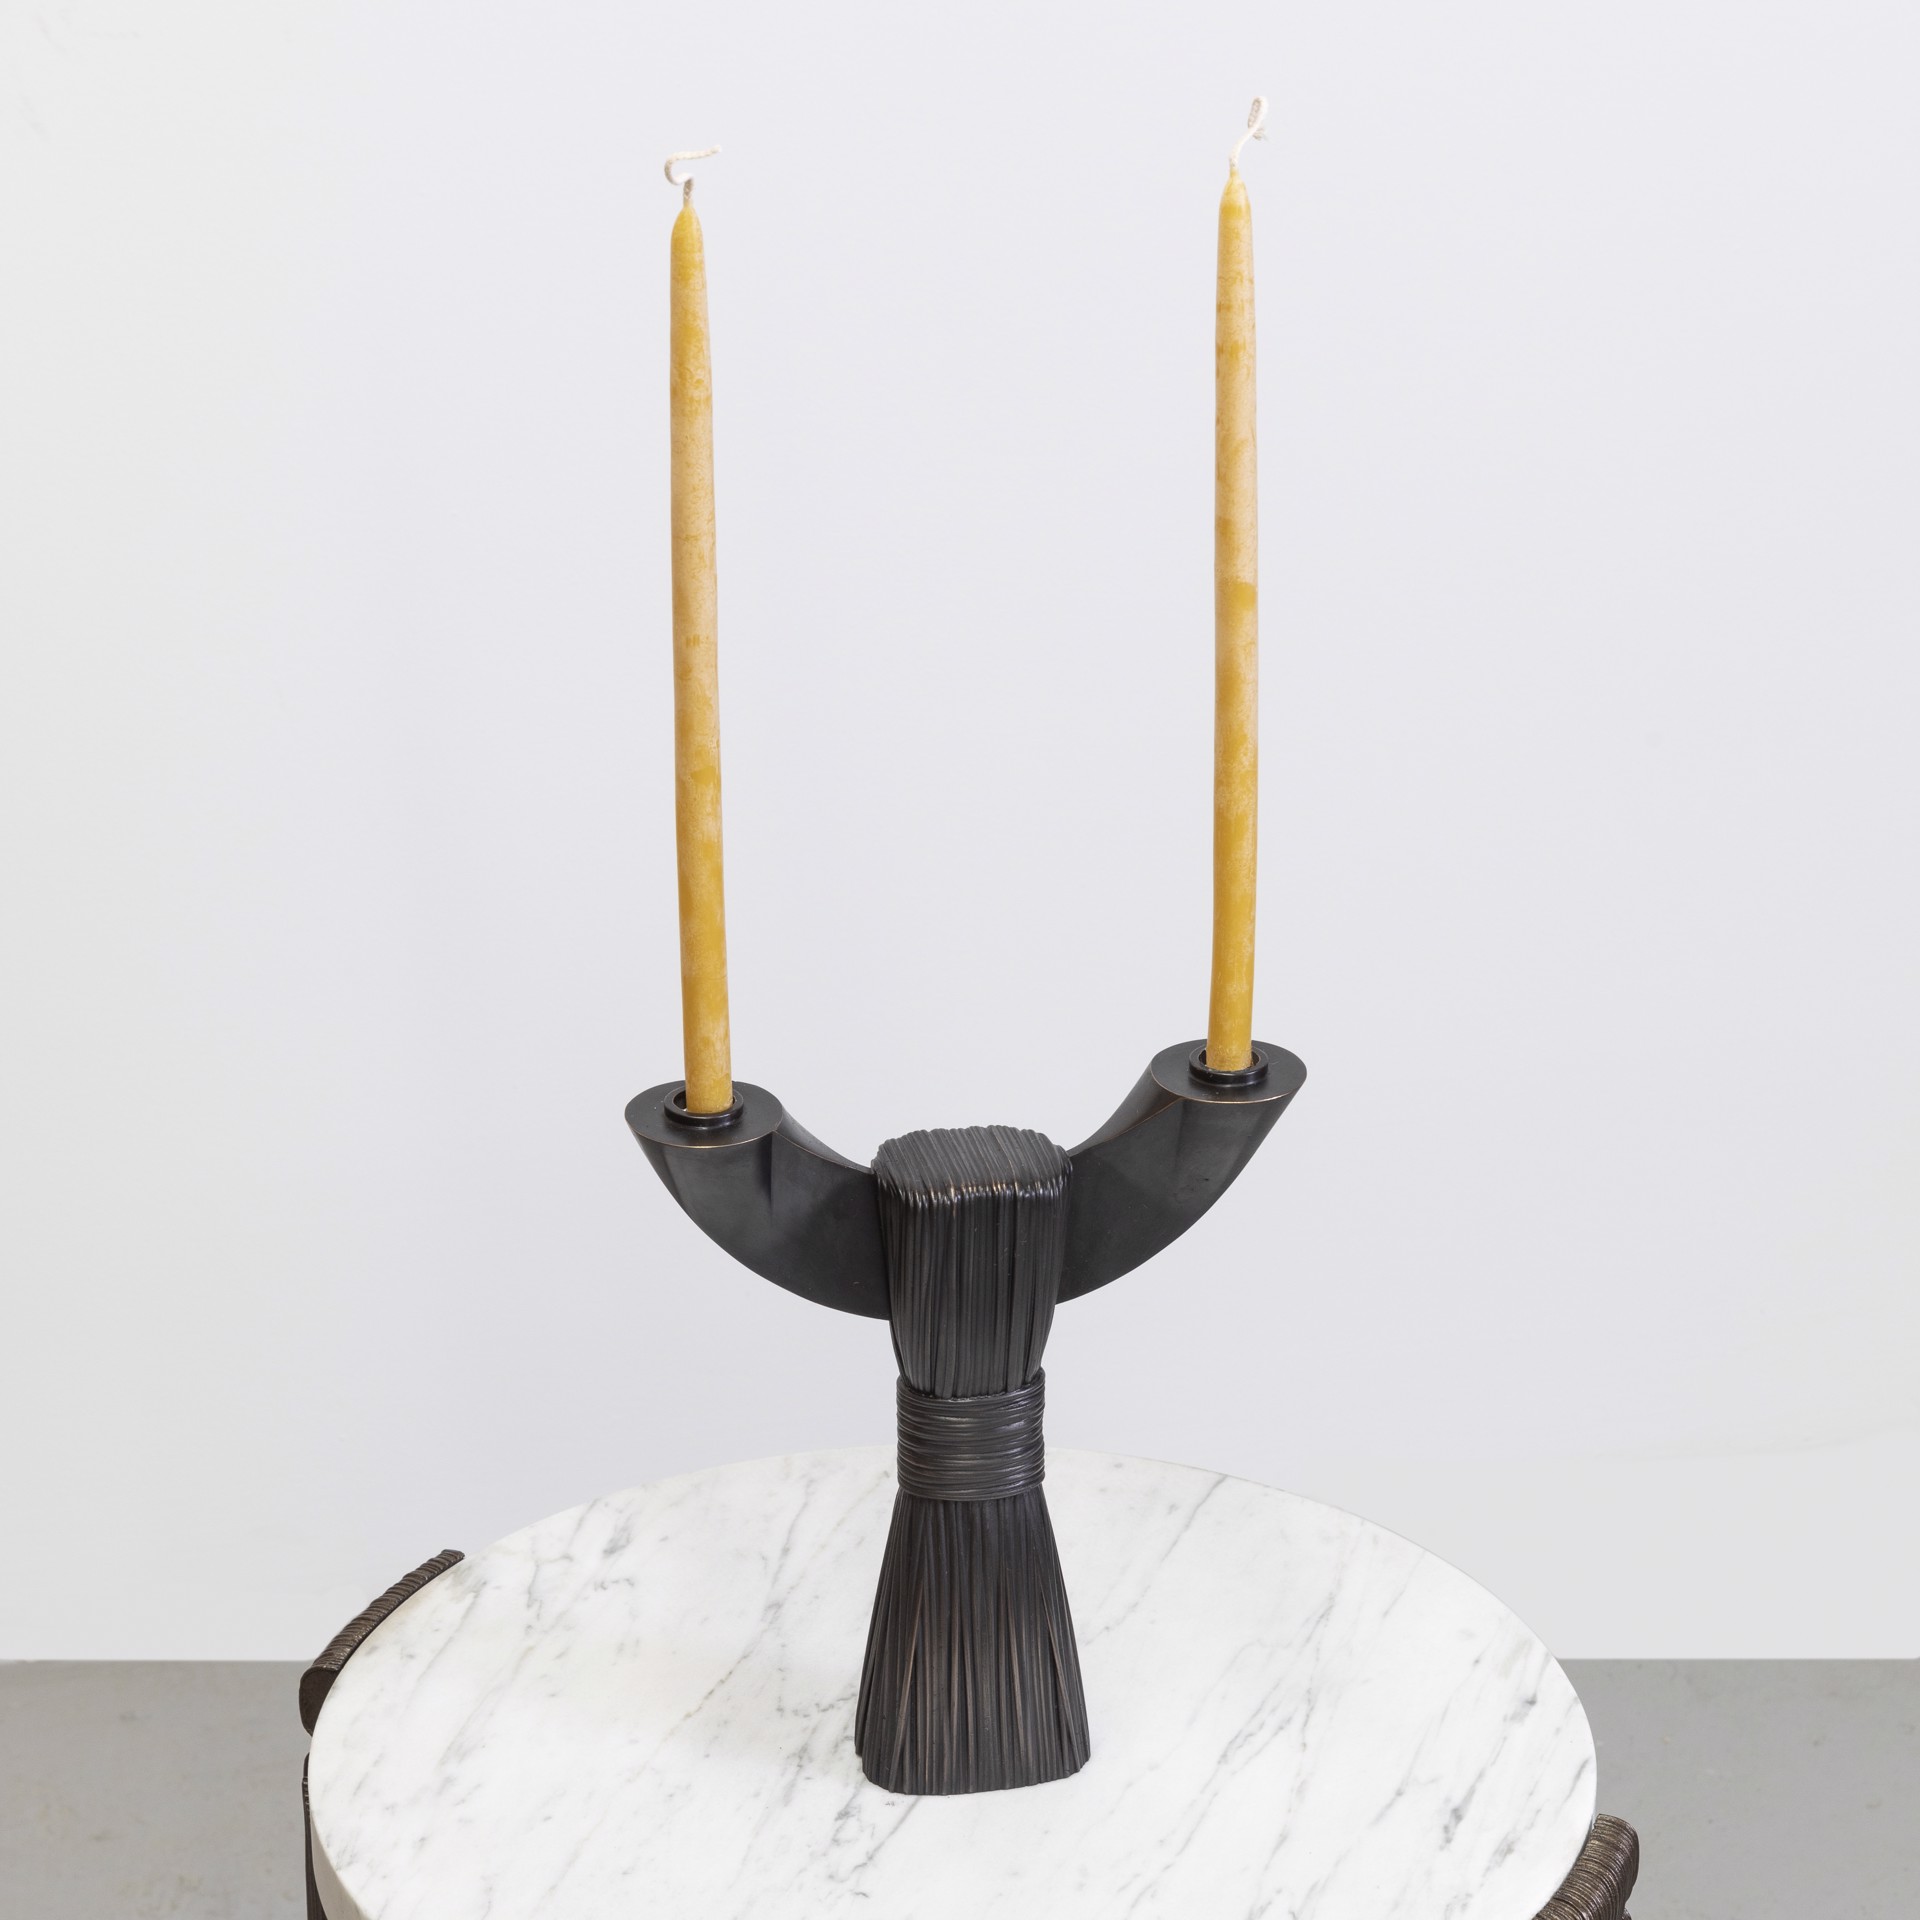 Candelabra in bronze by Anasthasia Millot